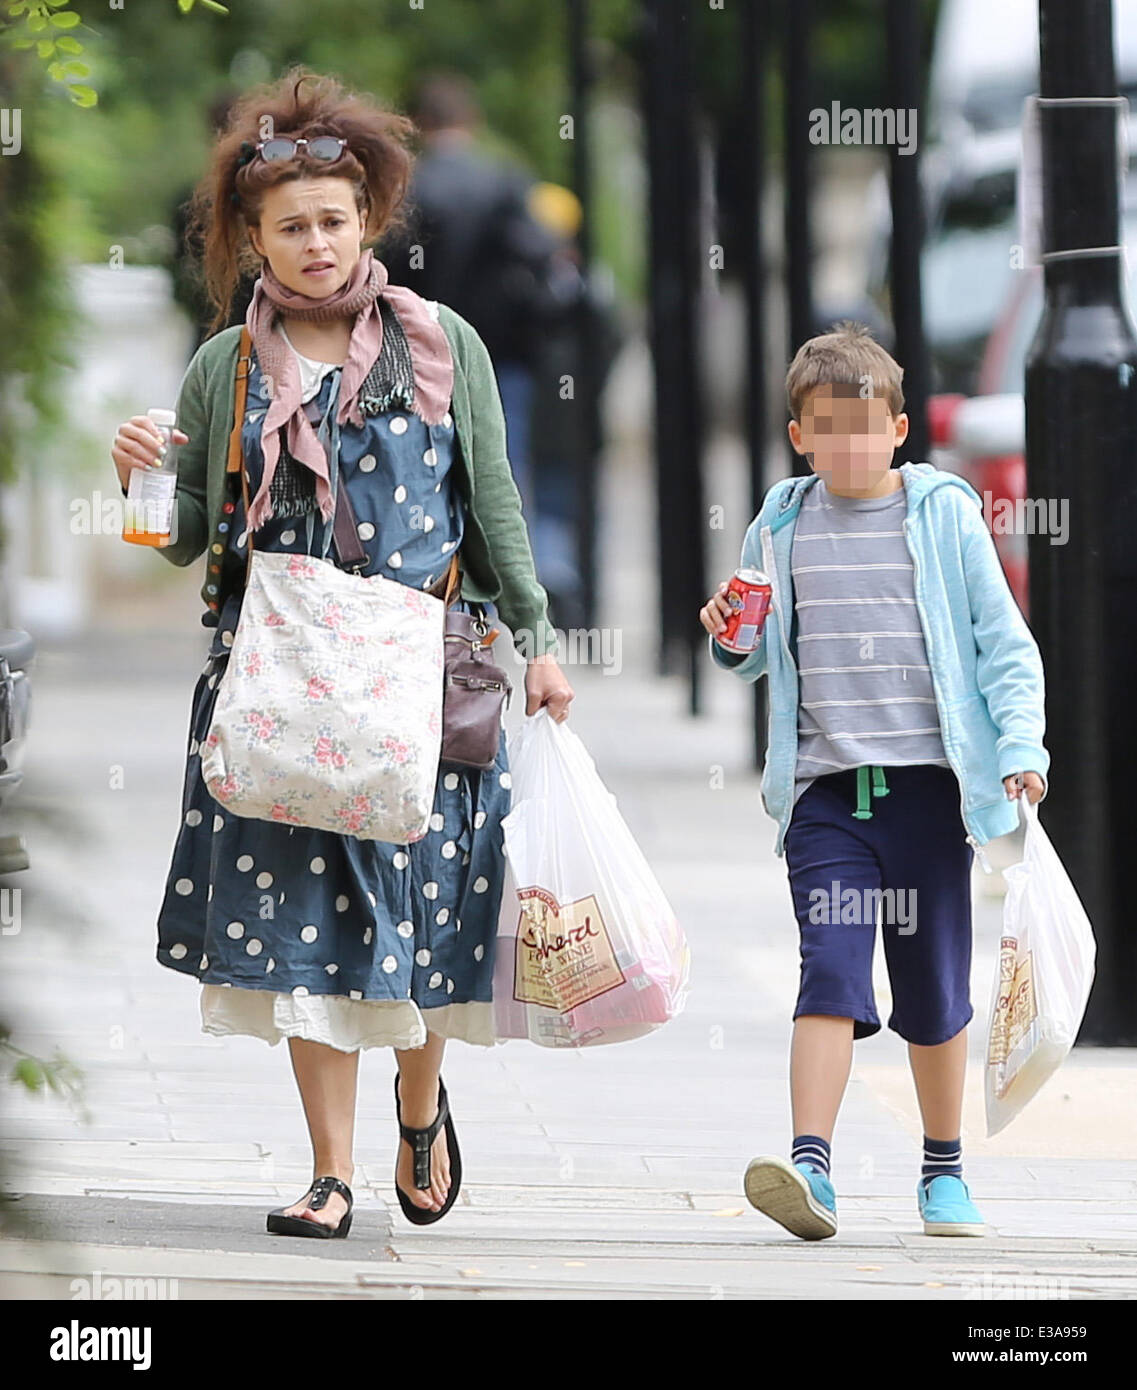 Helena Bonham Carter and her son Billy Raymond Burton taking a walk in  North London after doing some shopping Featuring: Helena Bonham Carter,Billy  Raymond Burton Where: London, United Kingdom When: 08 Sep